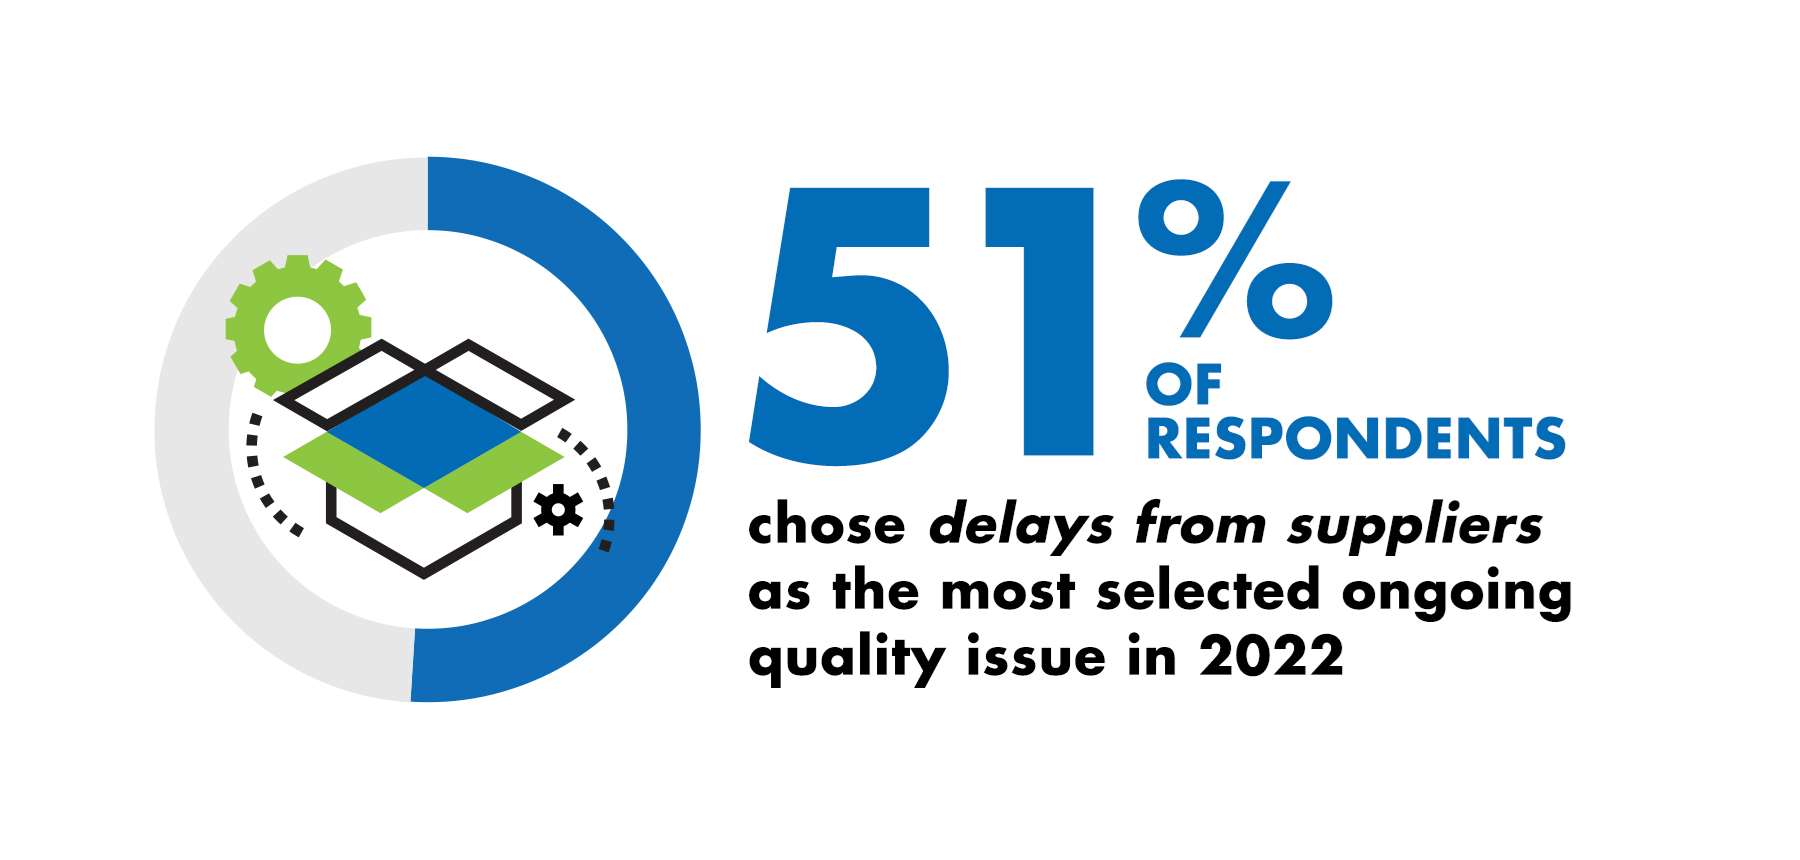 Graphic with text that reads "51% of respondents chose 'delays from suppliers' as the most selected ongoing quality issue in 2022"